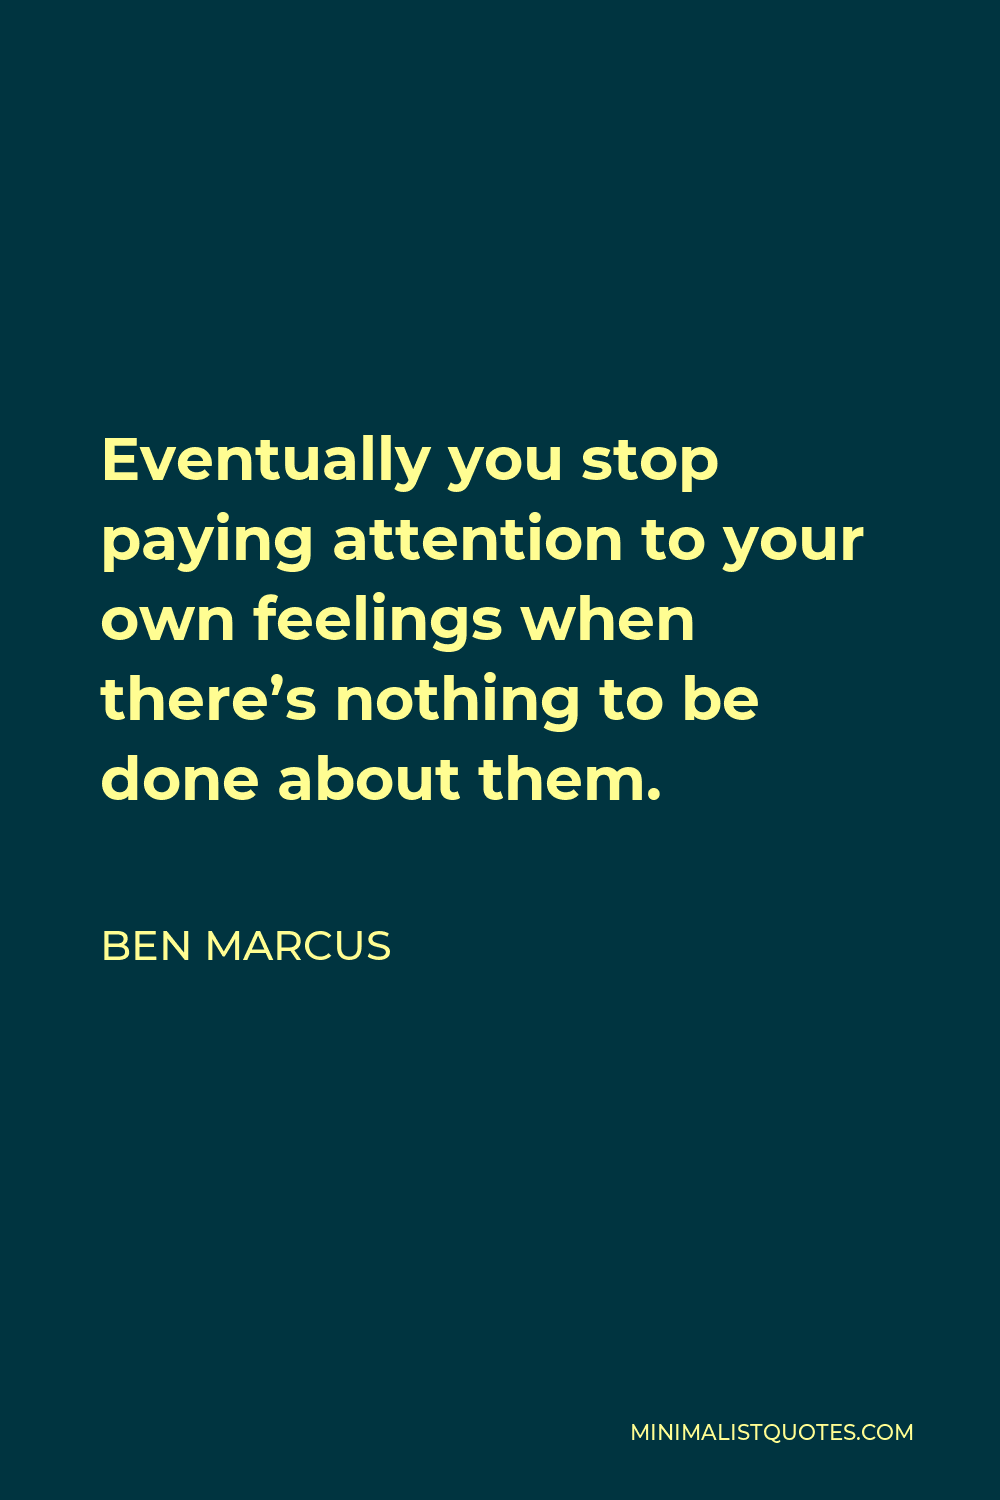 Ben Marcus Quote - Eventually you stop paying attention to your own feelings when there’s nothing to be done about them.